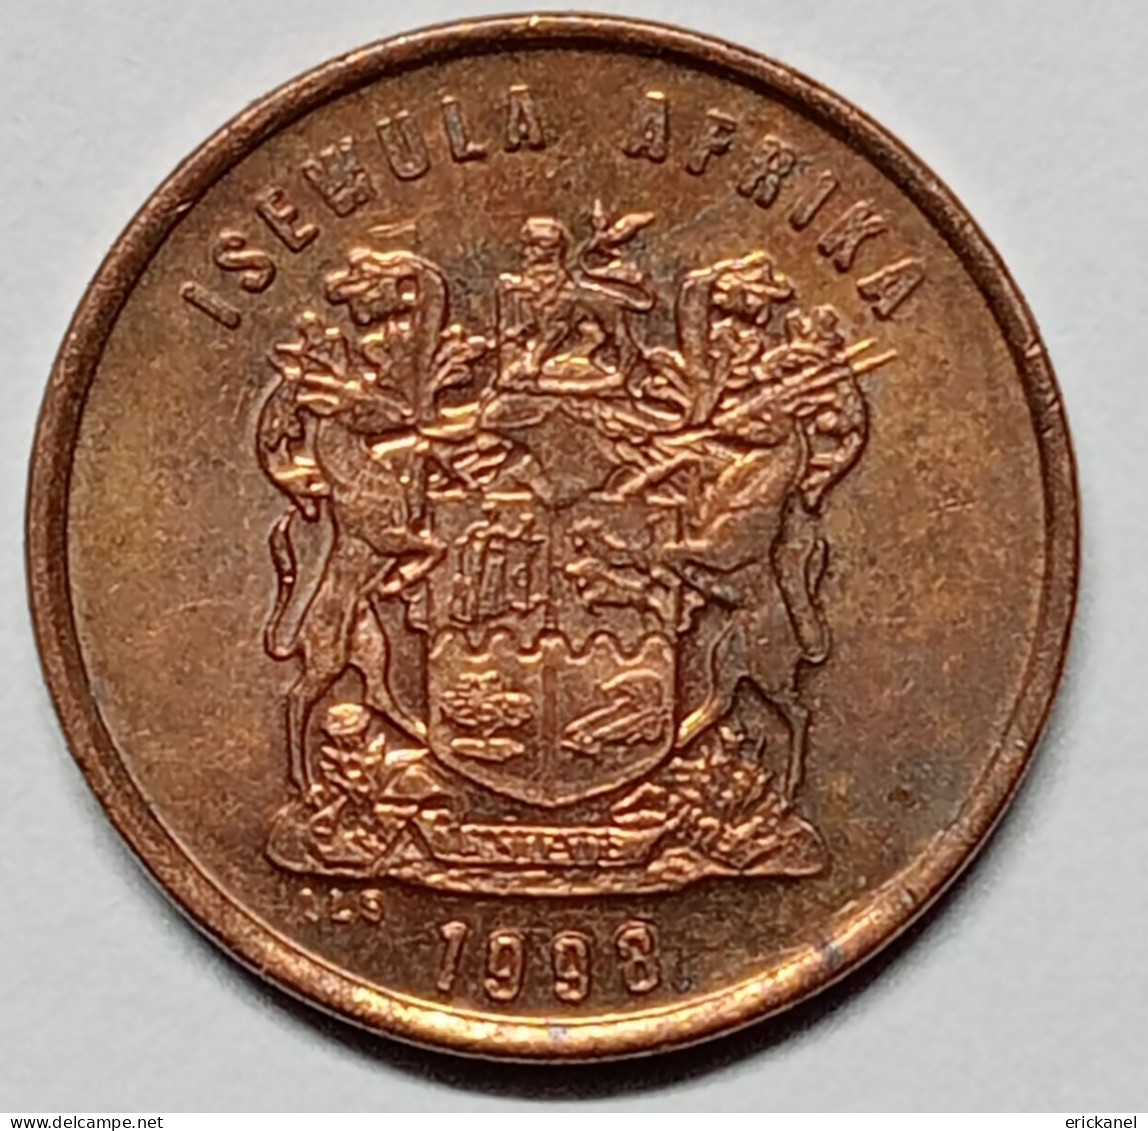 SOUTH AFRICA 1998 1 CENT - South Africa